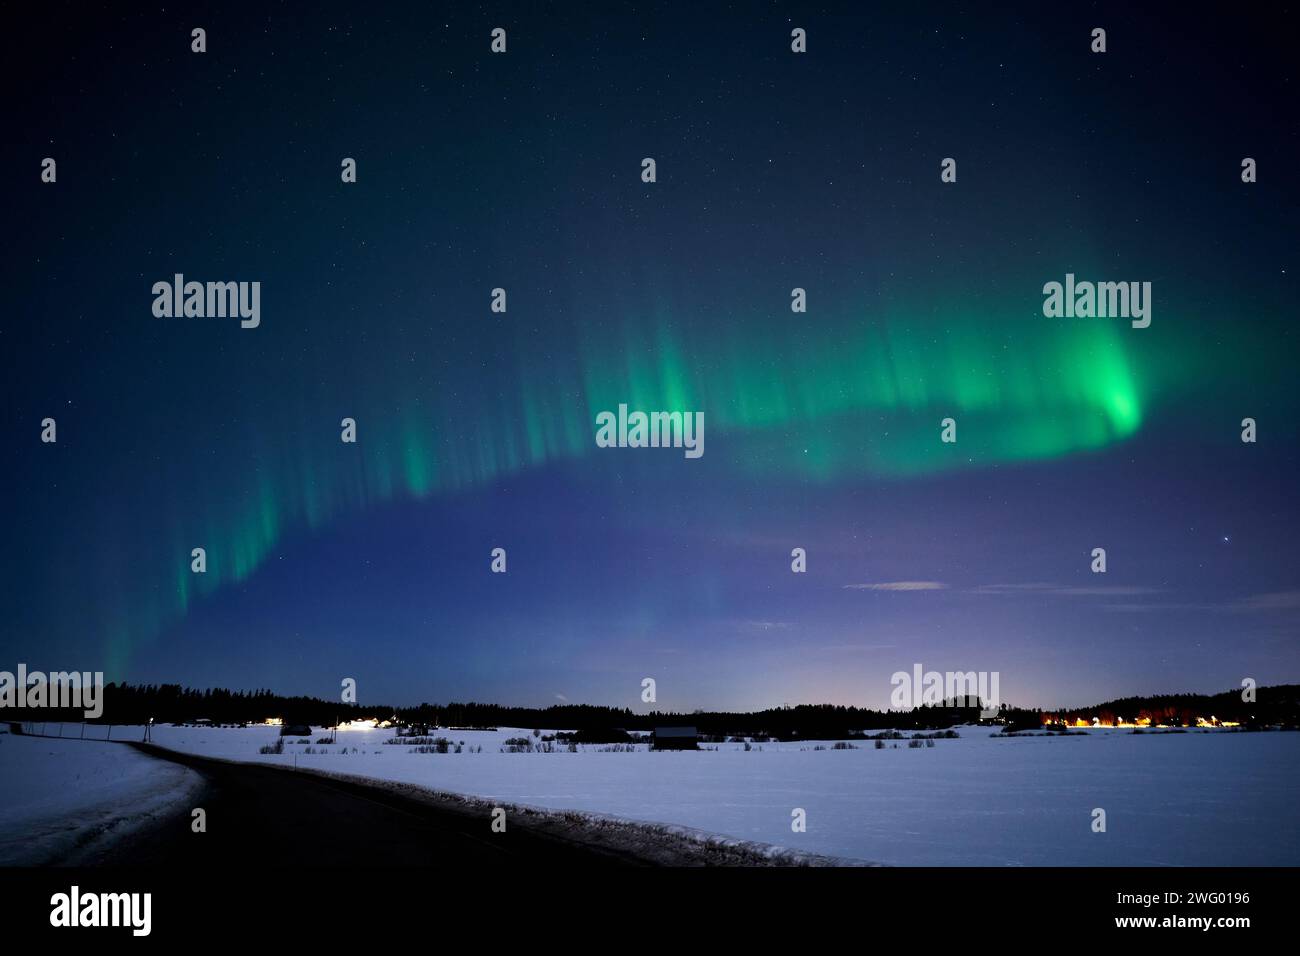 The Northern lights over snowy landscape at night with vibrant blue and green hues. Stock Photo